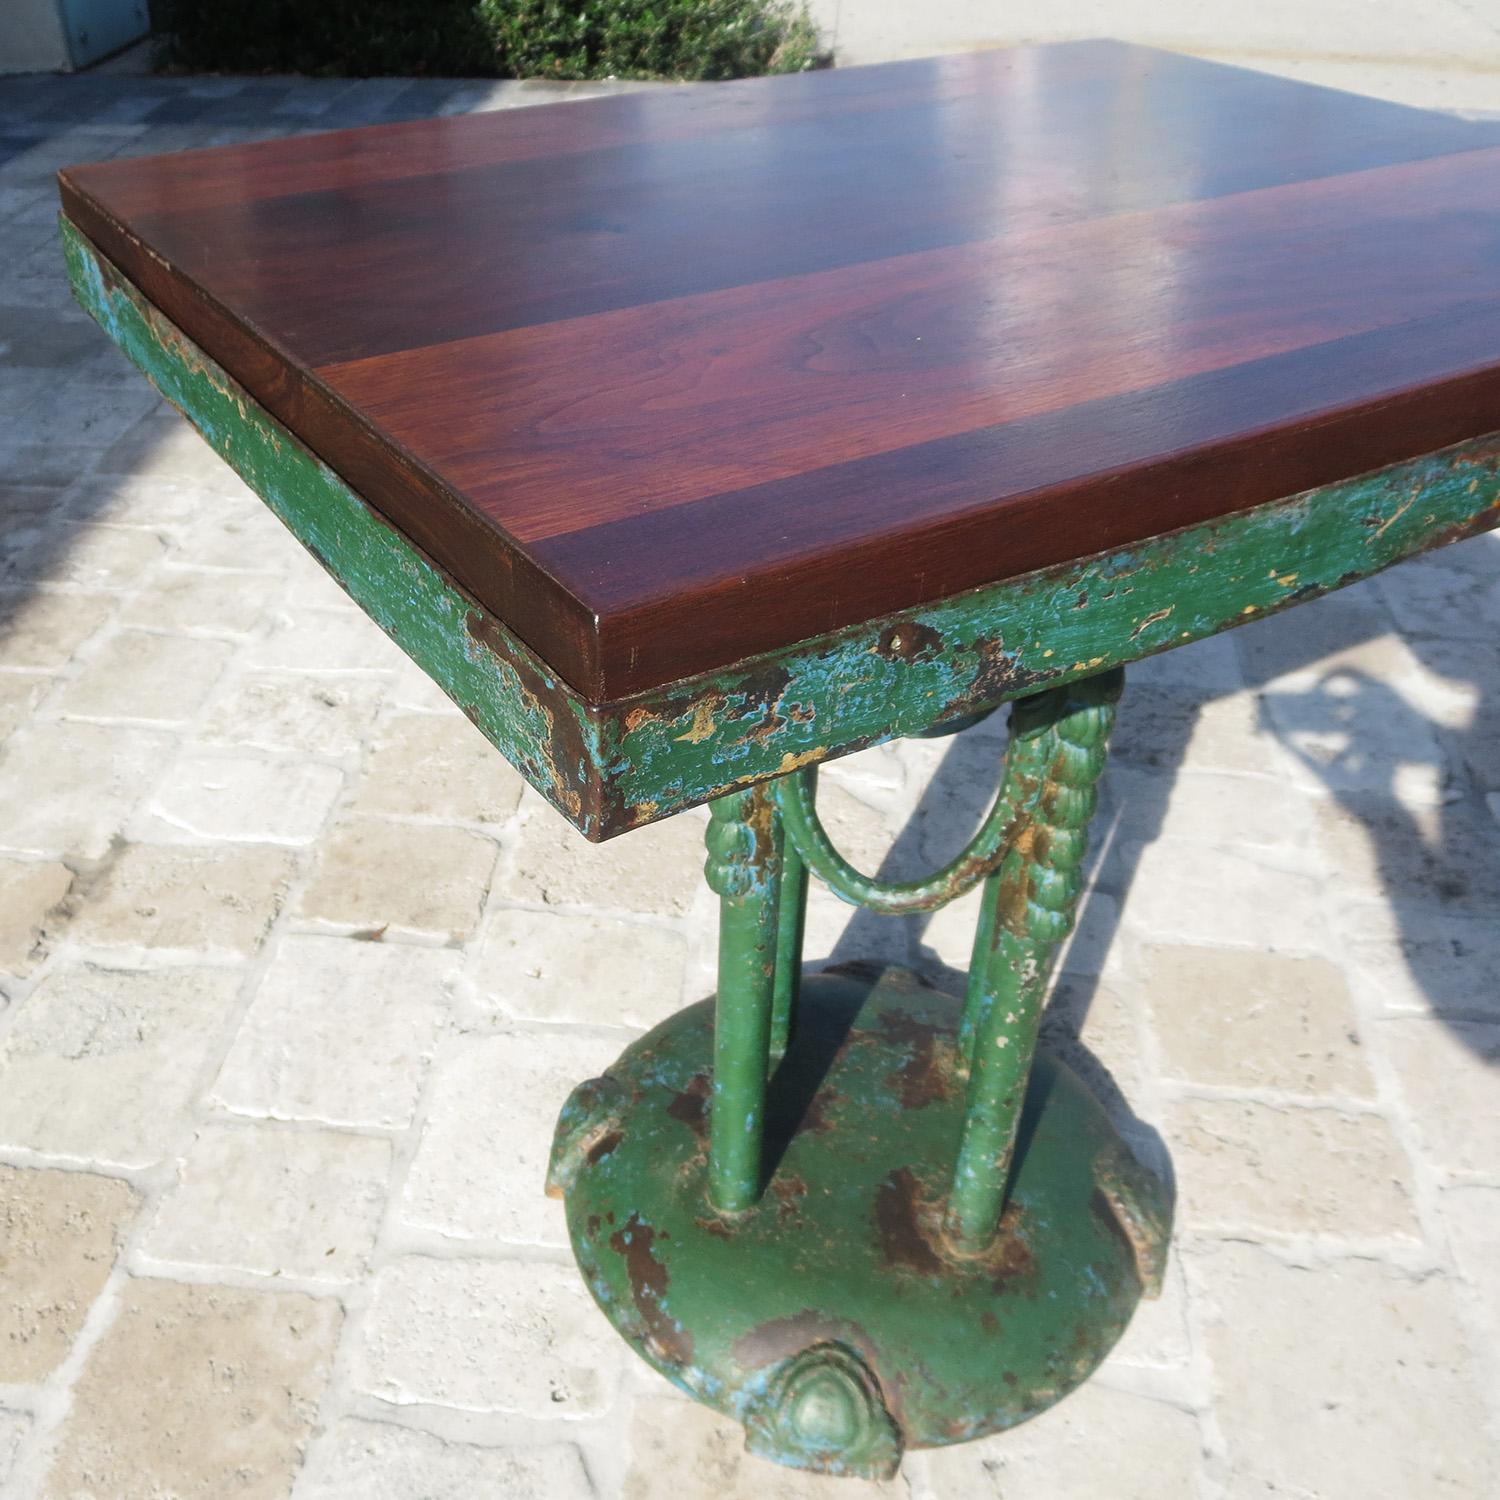 Rustic Painted Iron Cafe Table (Lackiert)